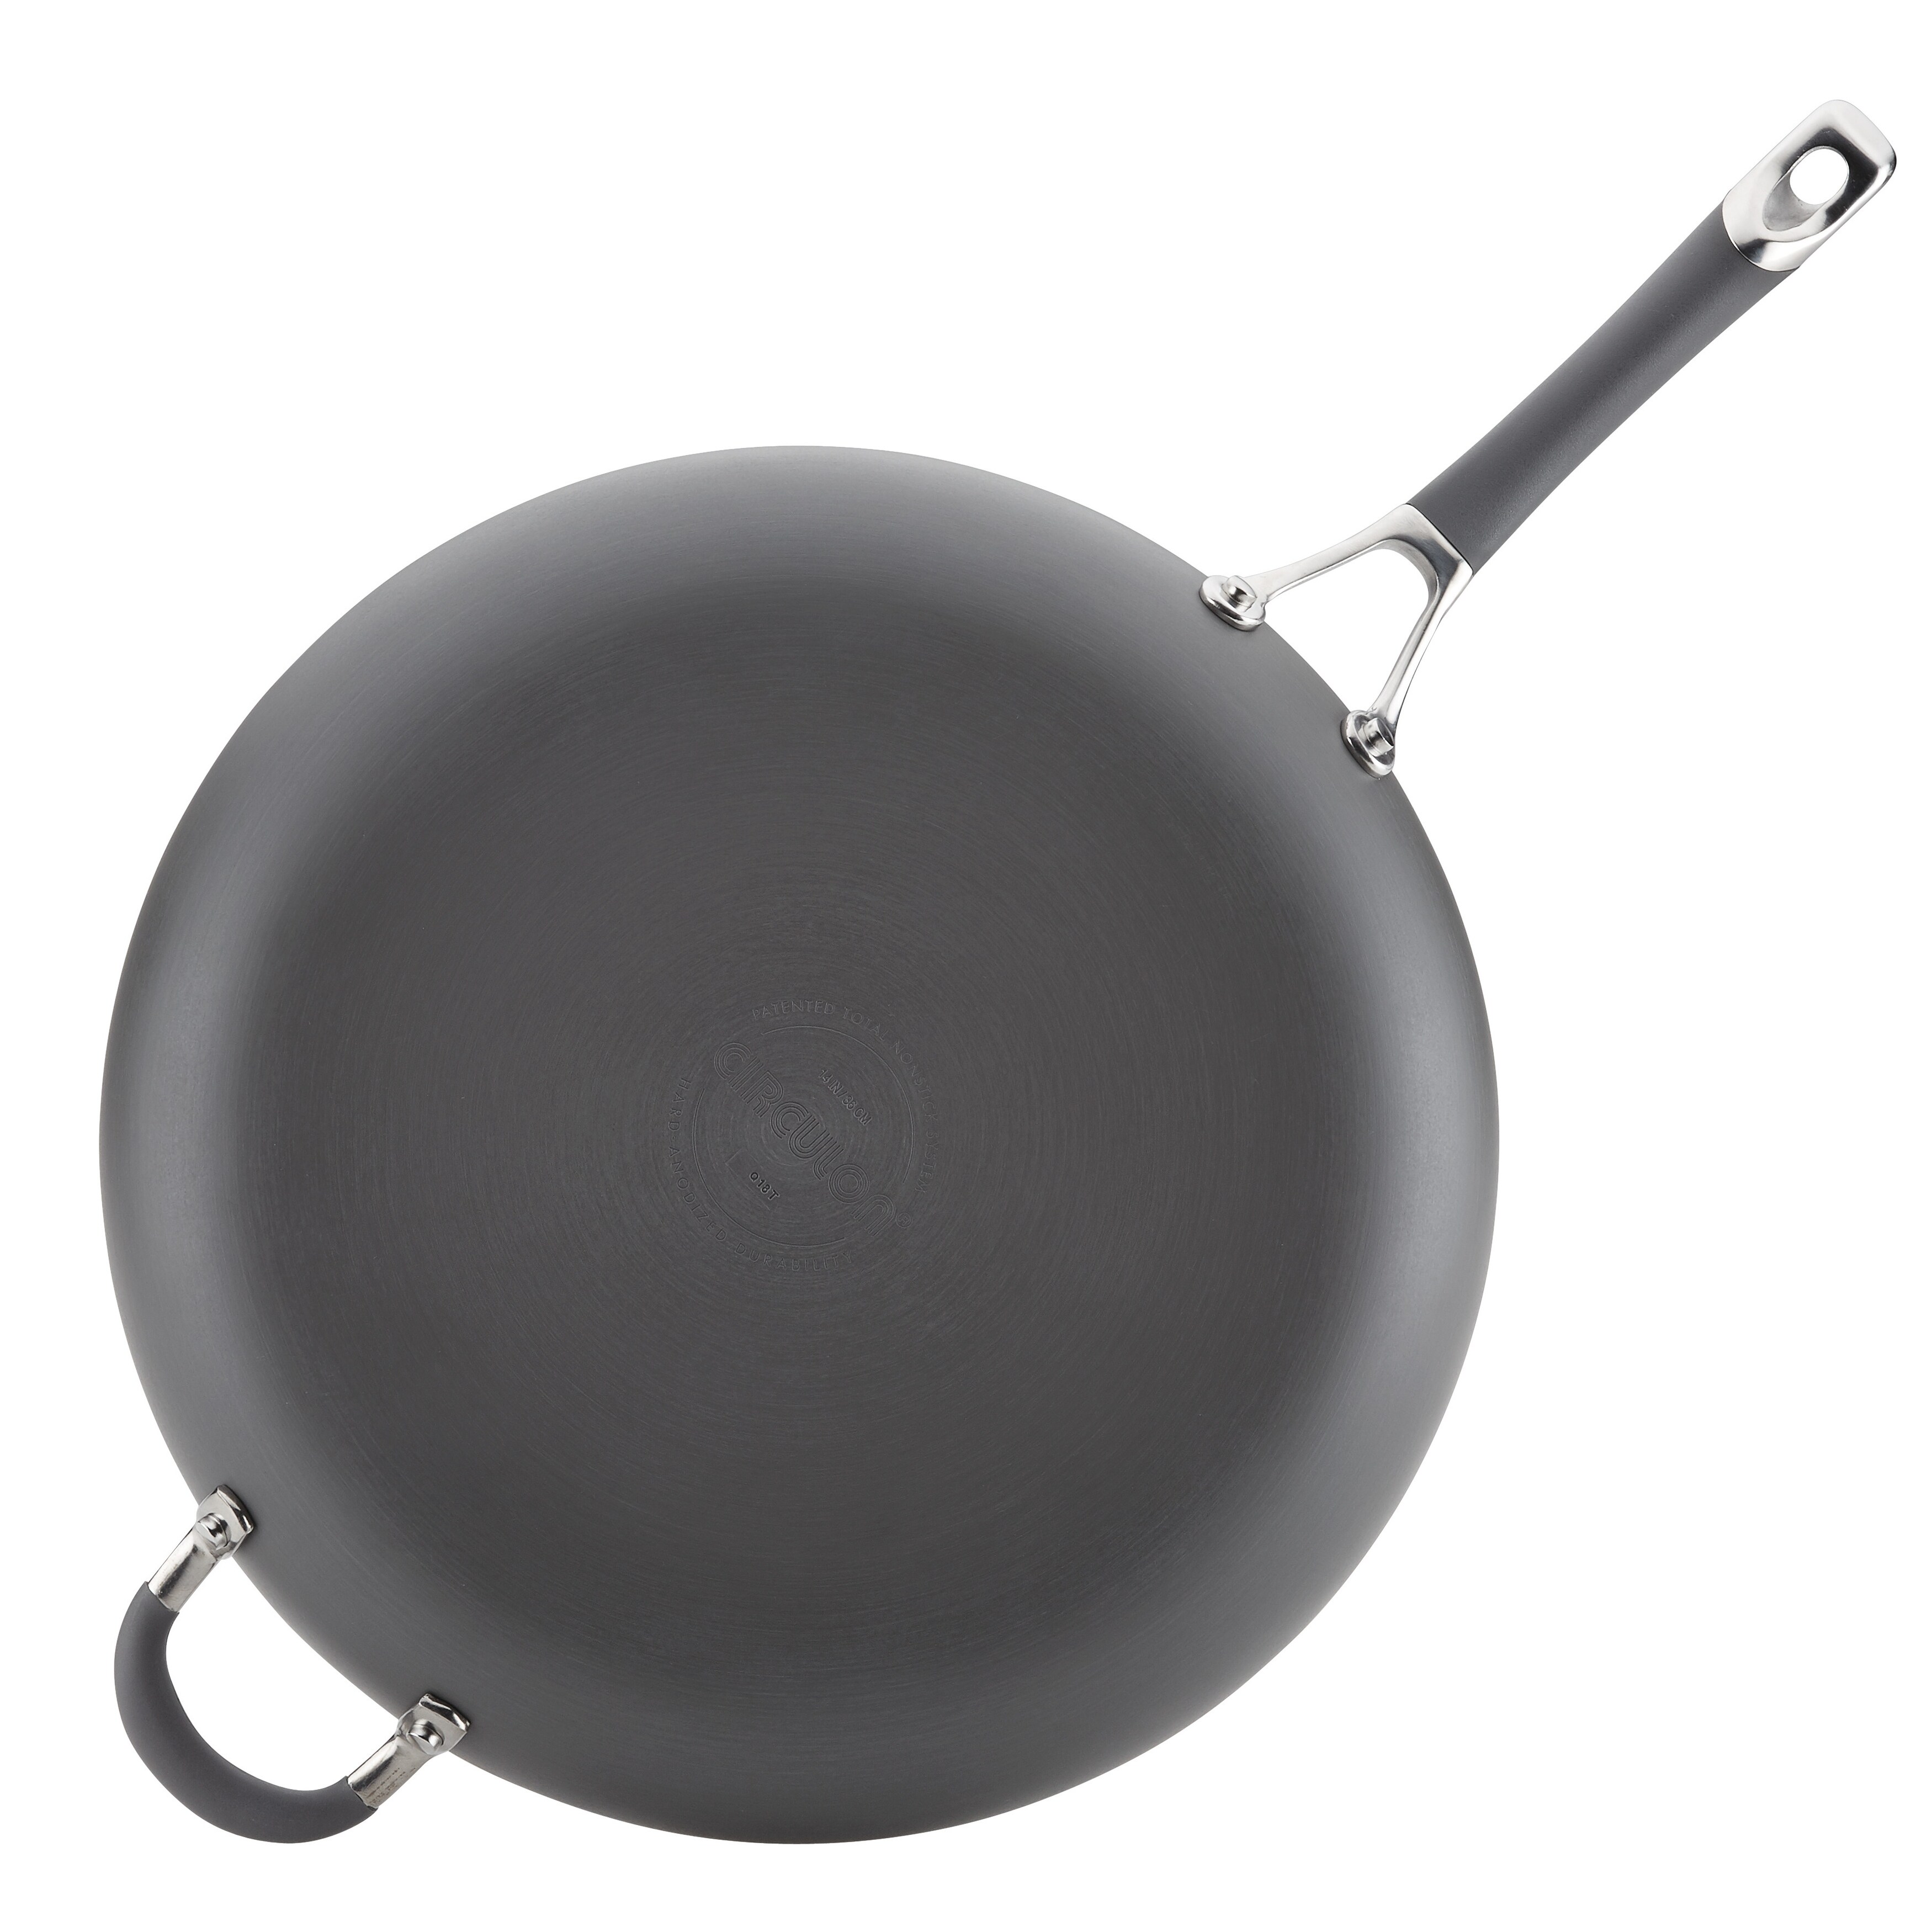 https://ak1.ostkcdn.com/images/products/is/images/direct/a189bd78ea279e536b9c36317f93f7b3fd556b17/Circulon-Radiance-Hard-Anodized-Nonstick-Frying-Pan-with-Helper-Handle%2C-14-Inch%2C-Gray.jpg